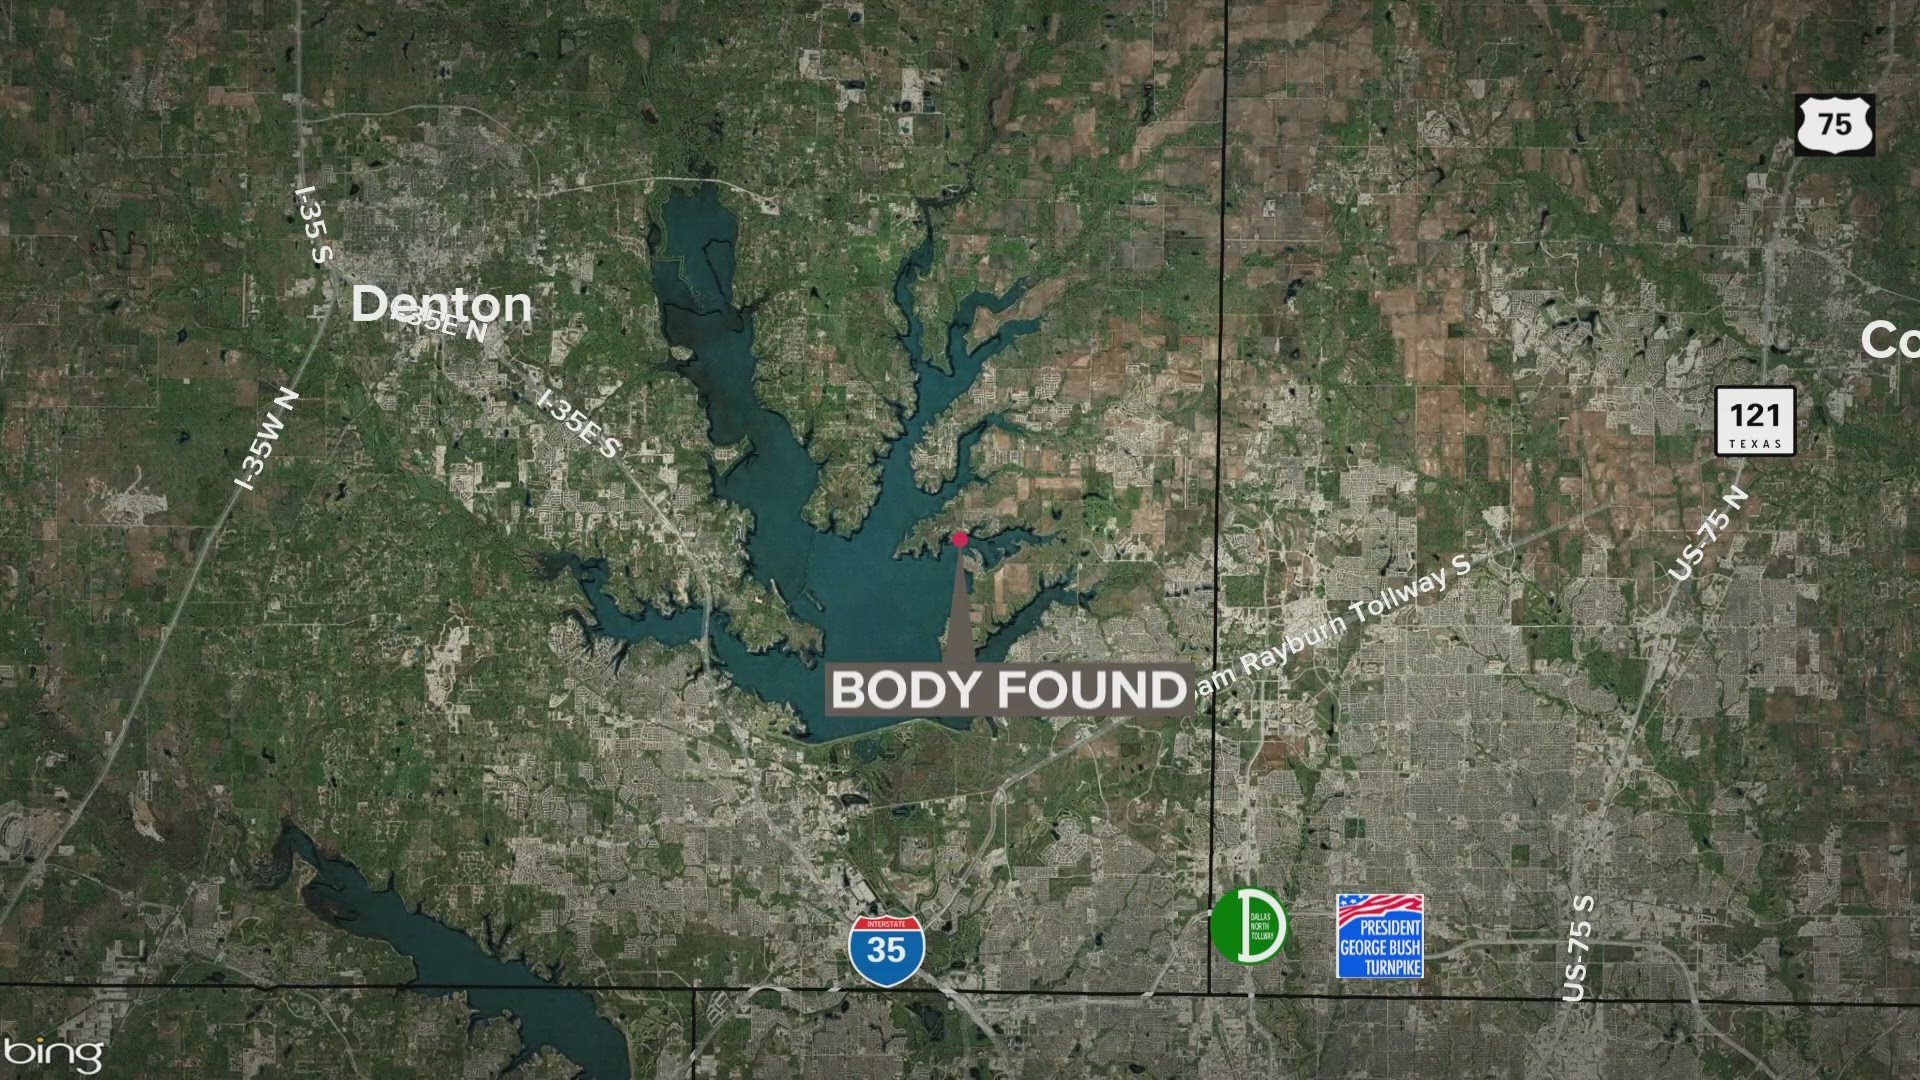 The body was found along the shoreline of the lake.